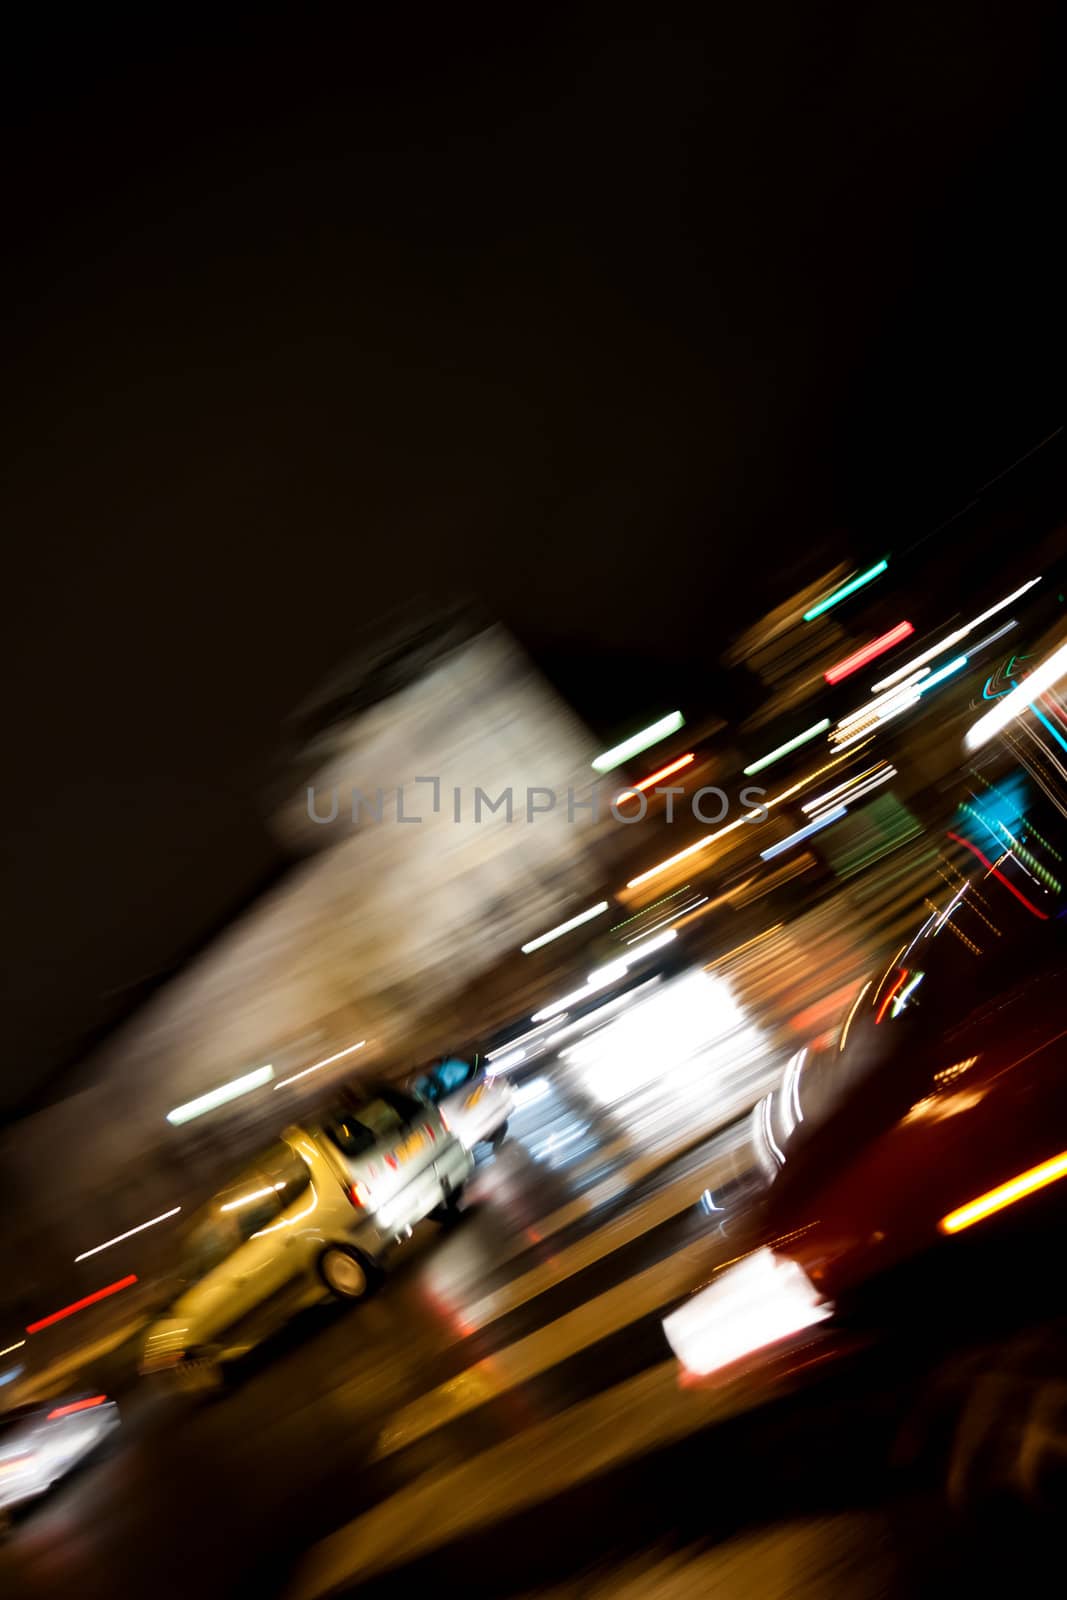 Traffic at night in a city. Wet road after rain. Intentionally blurred